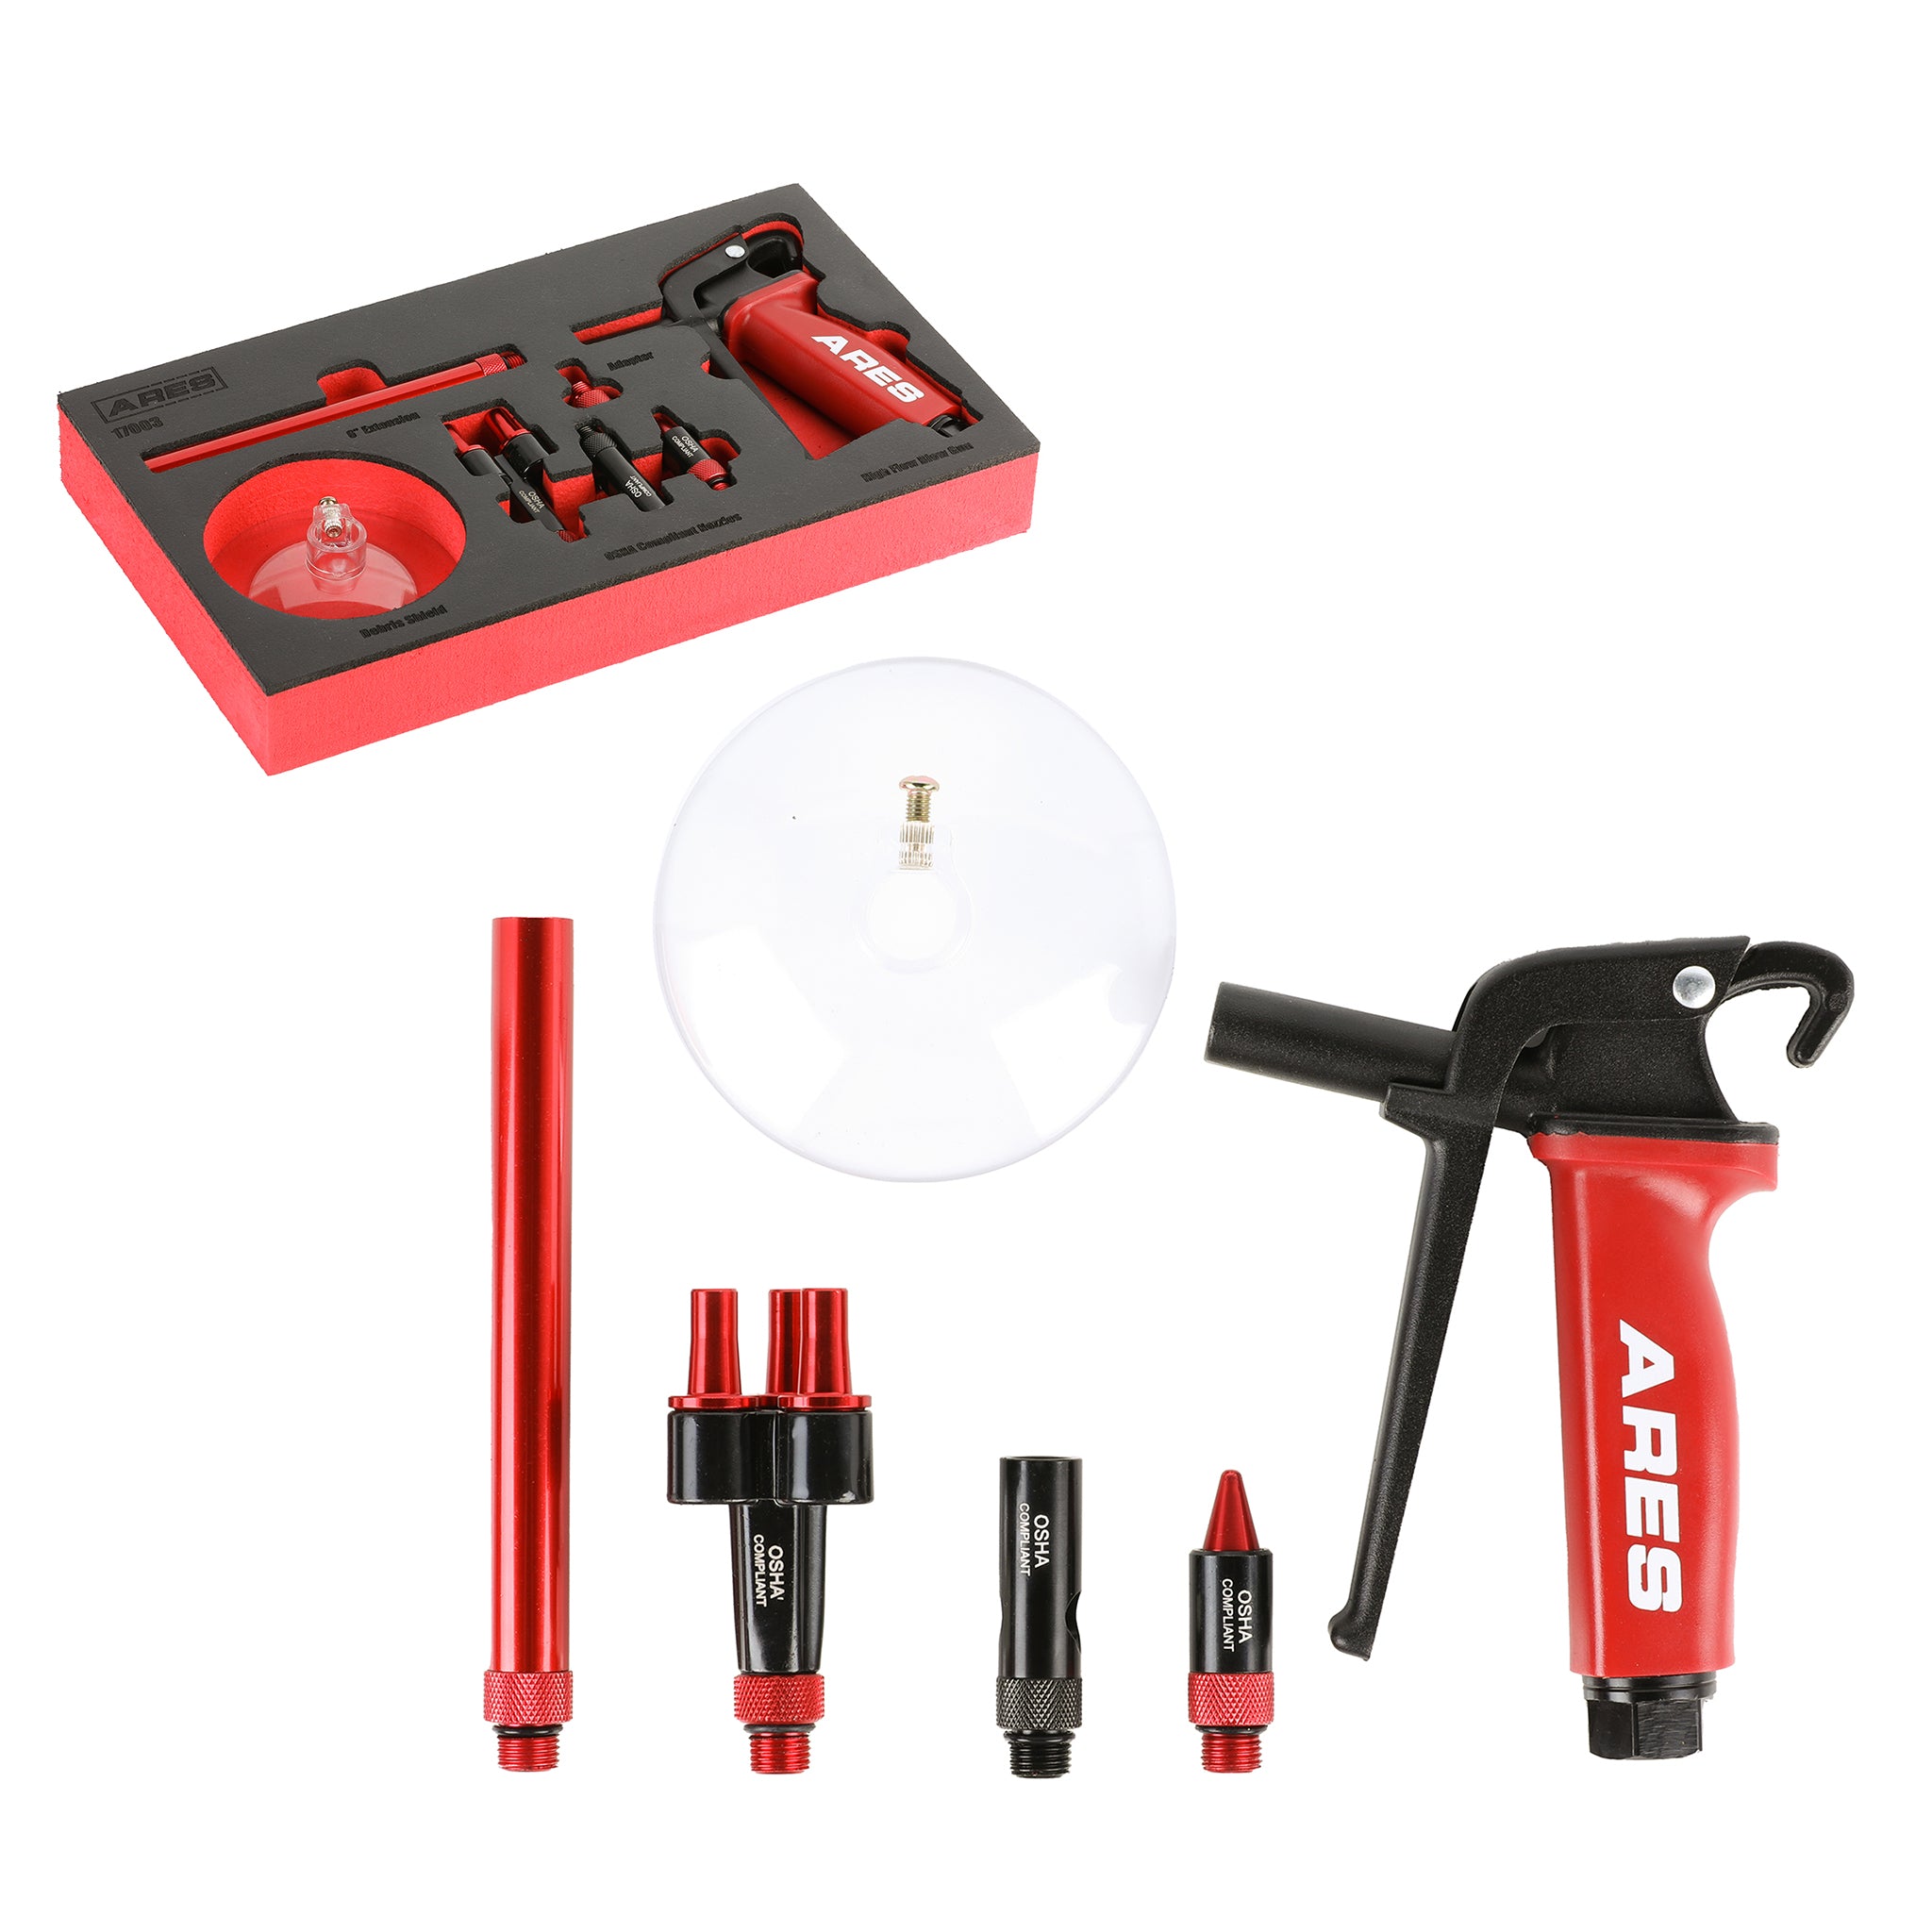 Air and Fuel Line Quick Disconnect Tool Set – ARES Tool, MJD